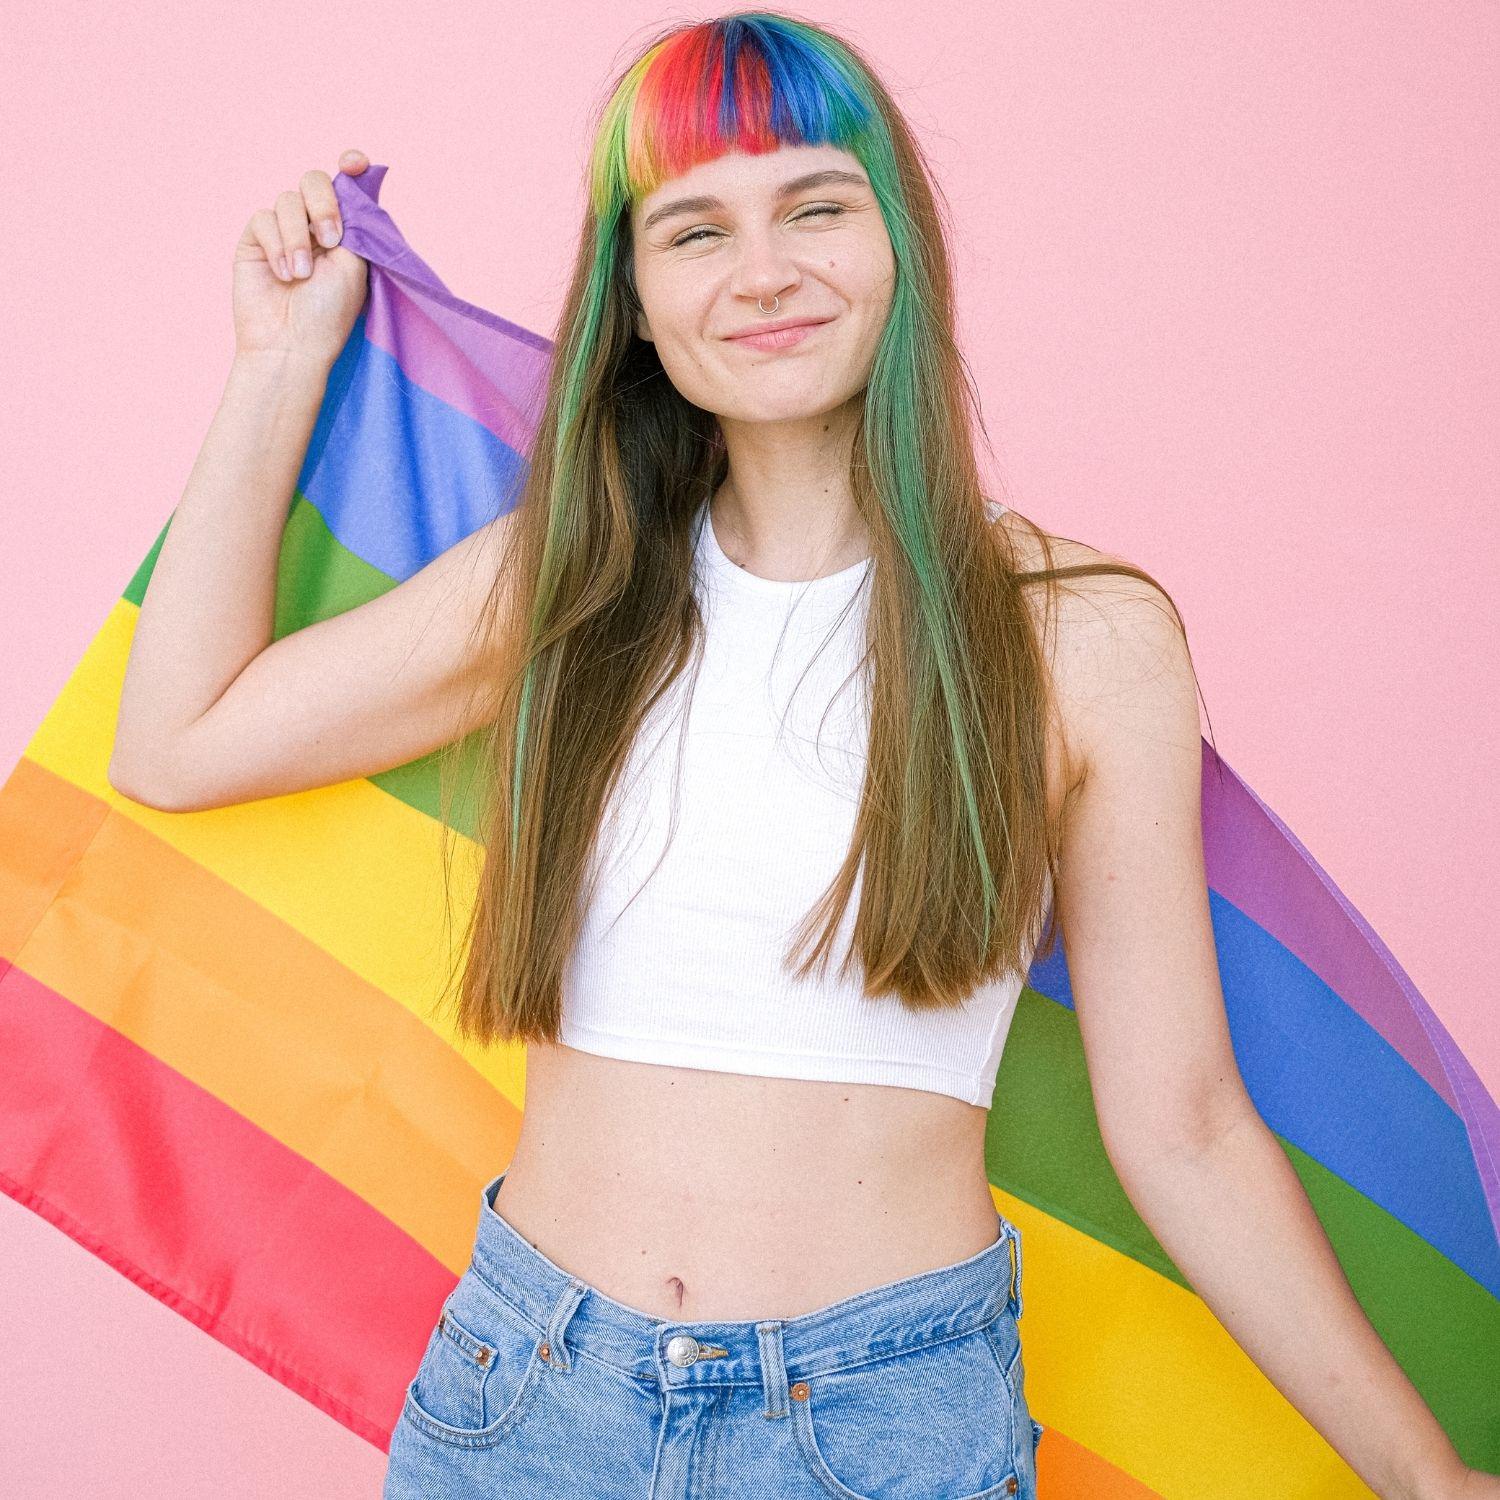 A young girl with colorful hair smiling and holding with a LGBTQ Rainbow Pride Flag. TOMSCOUT LGBTQ+ Classic Pride Flag